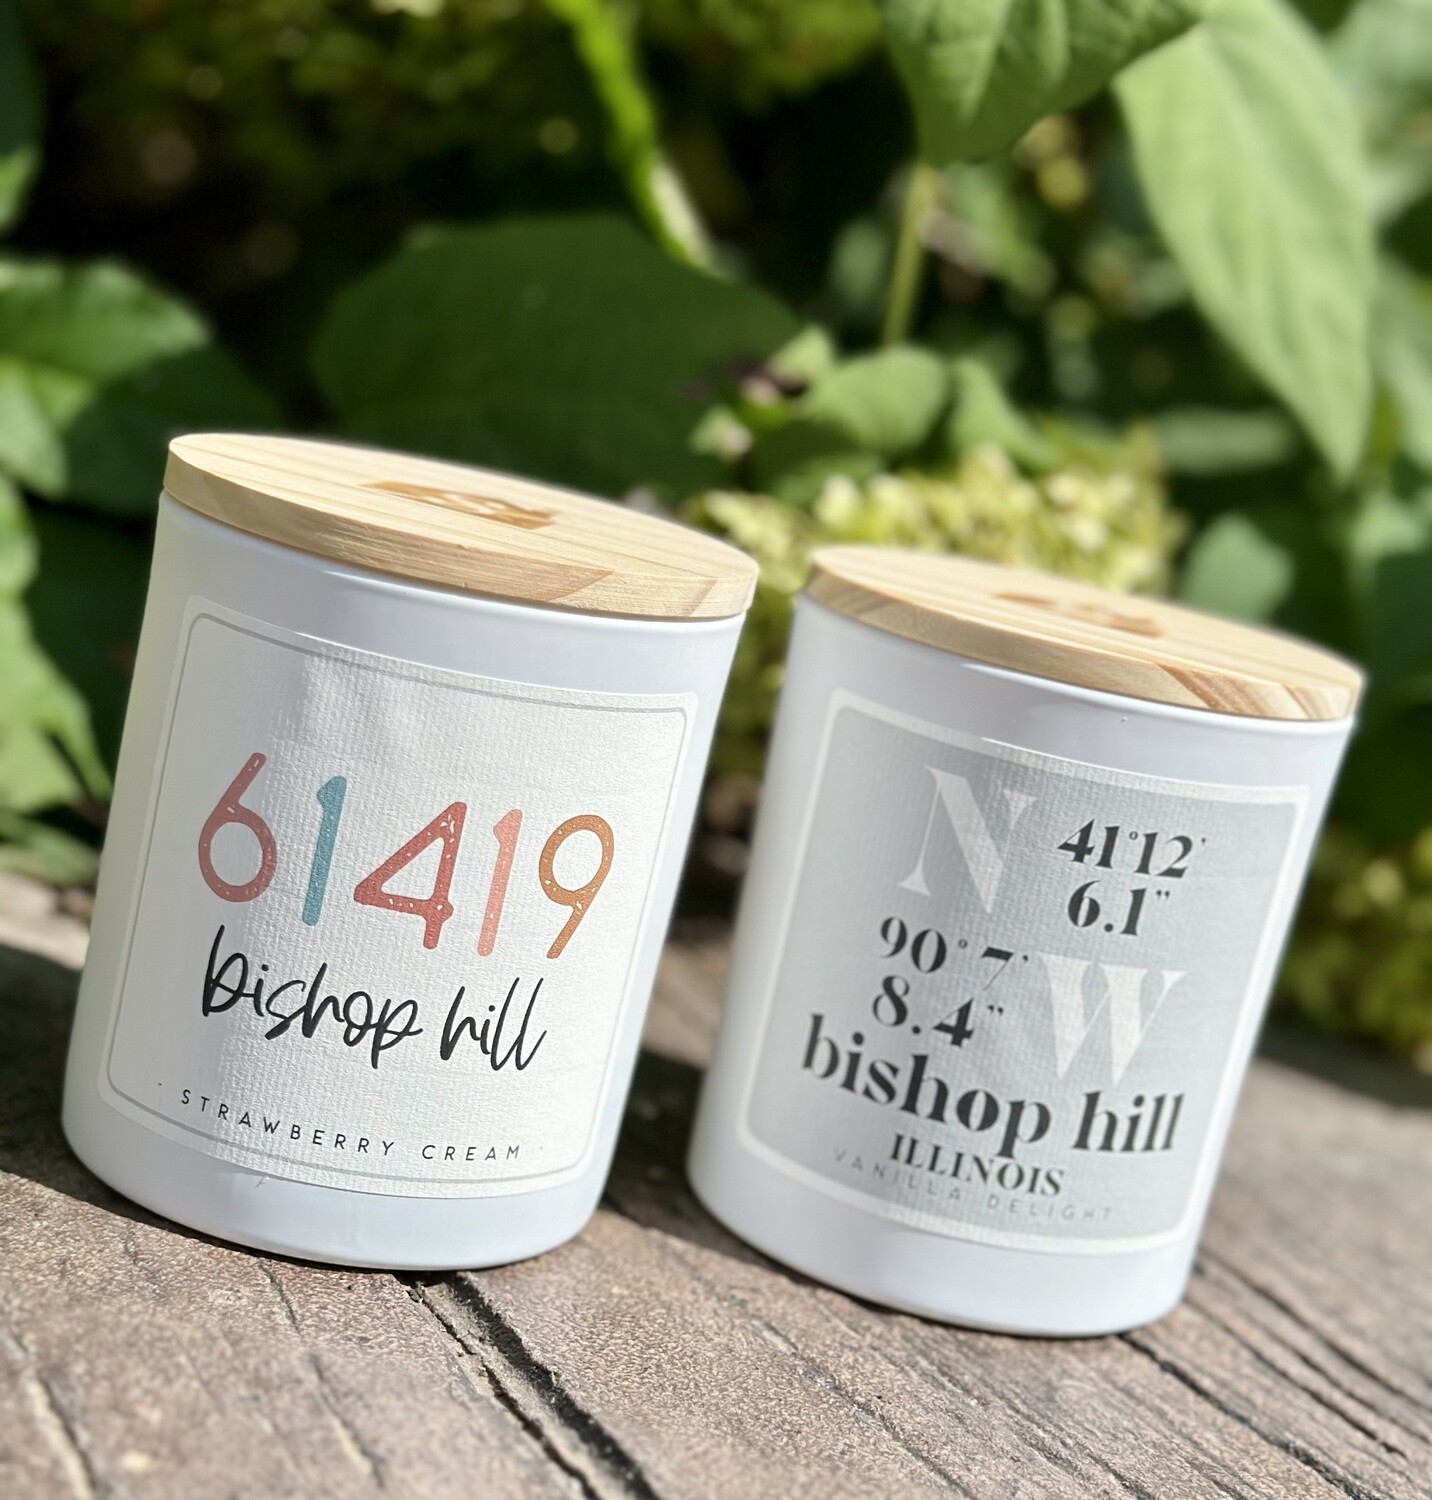 Bishop Hill Candles